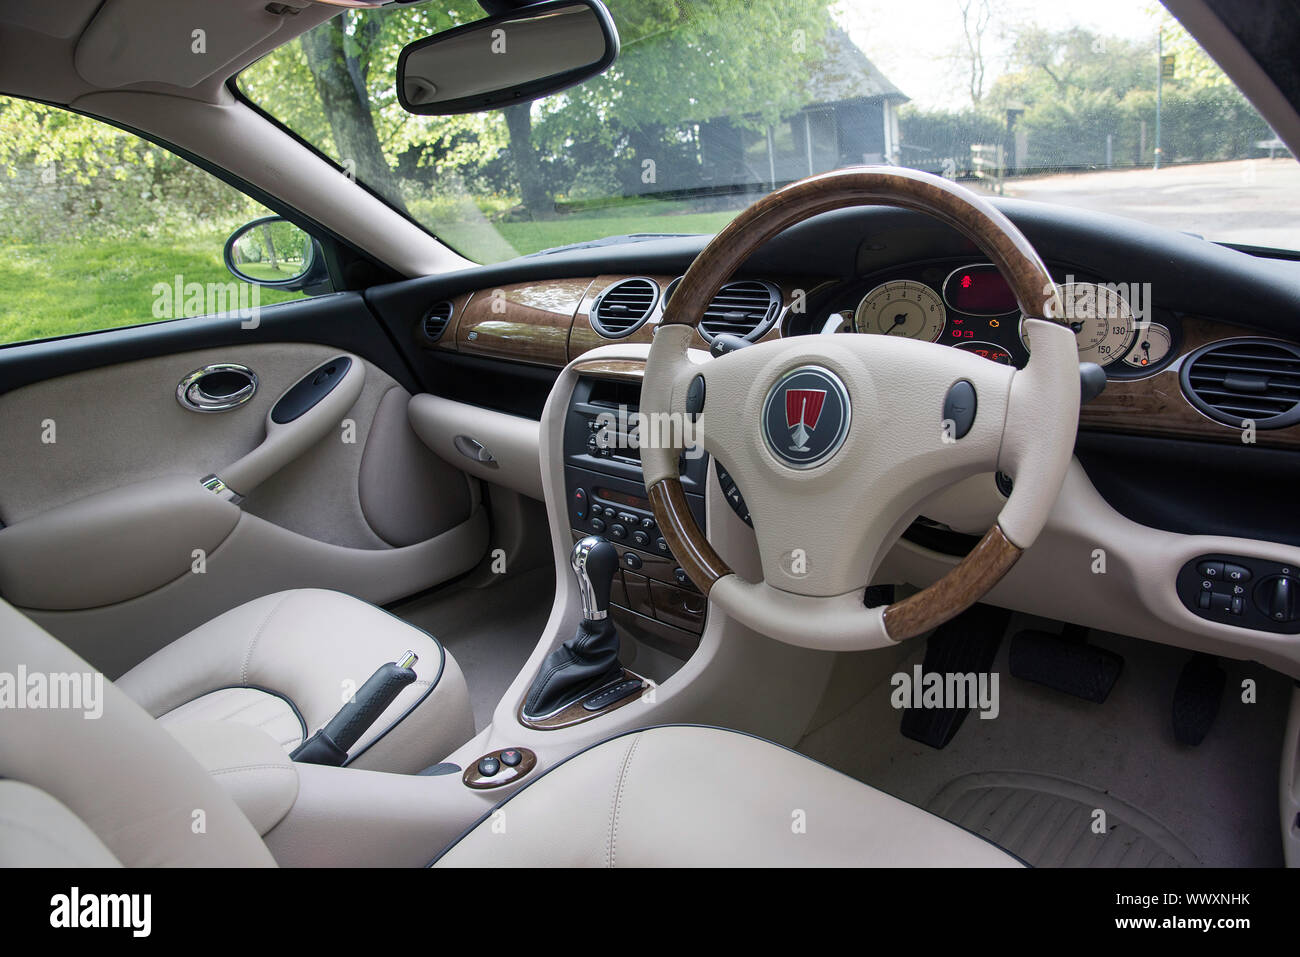 2005 Rover 75 one of the last off the production line. Stock Photo